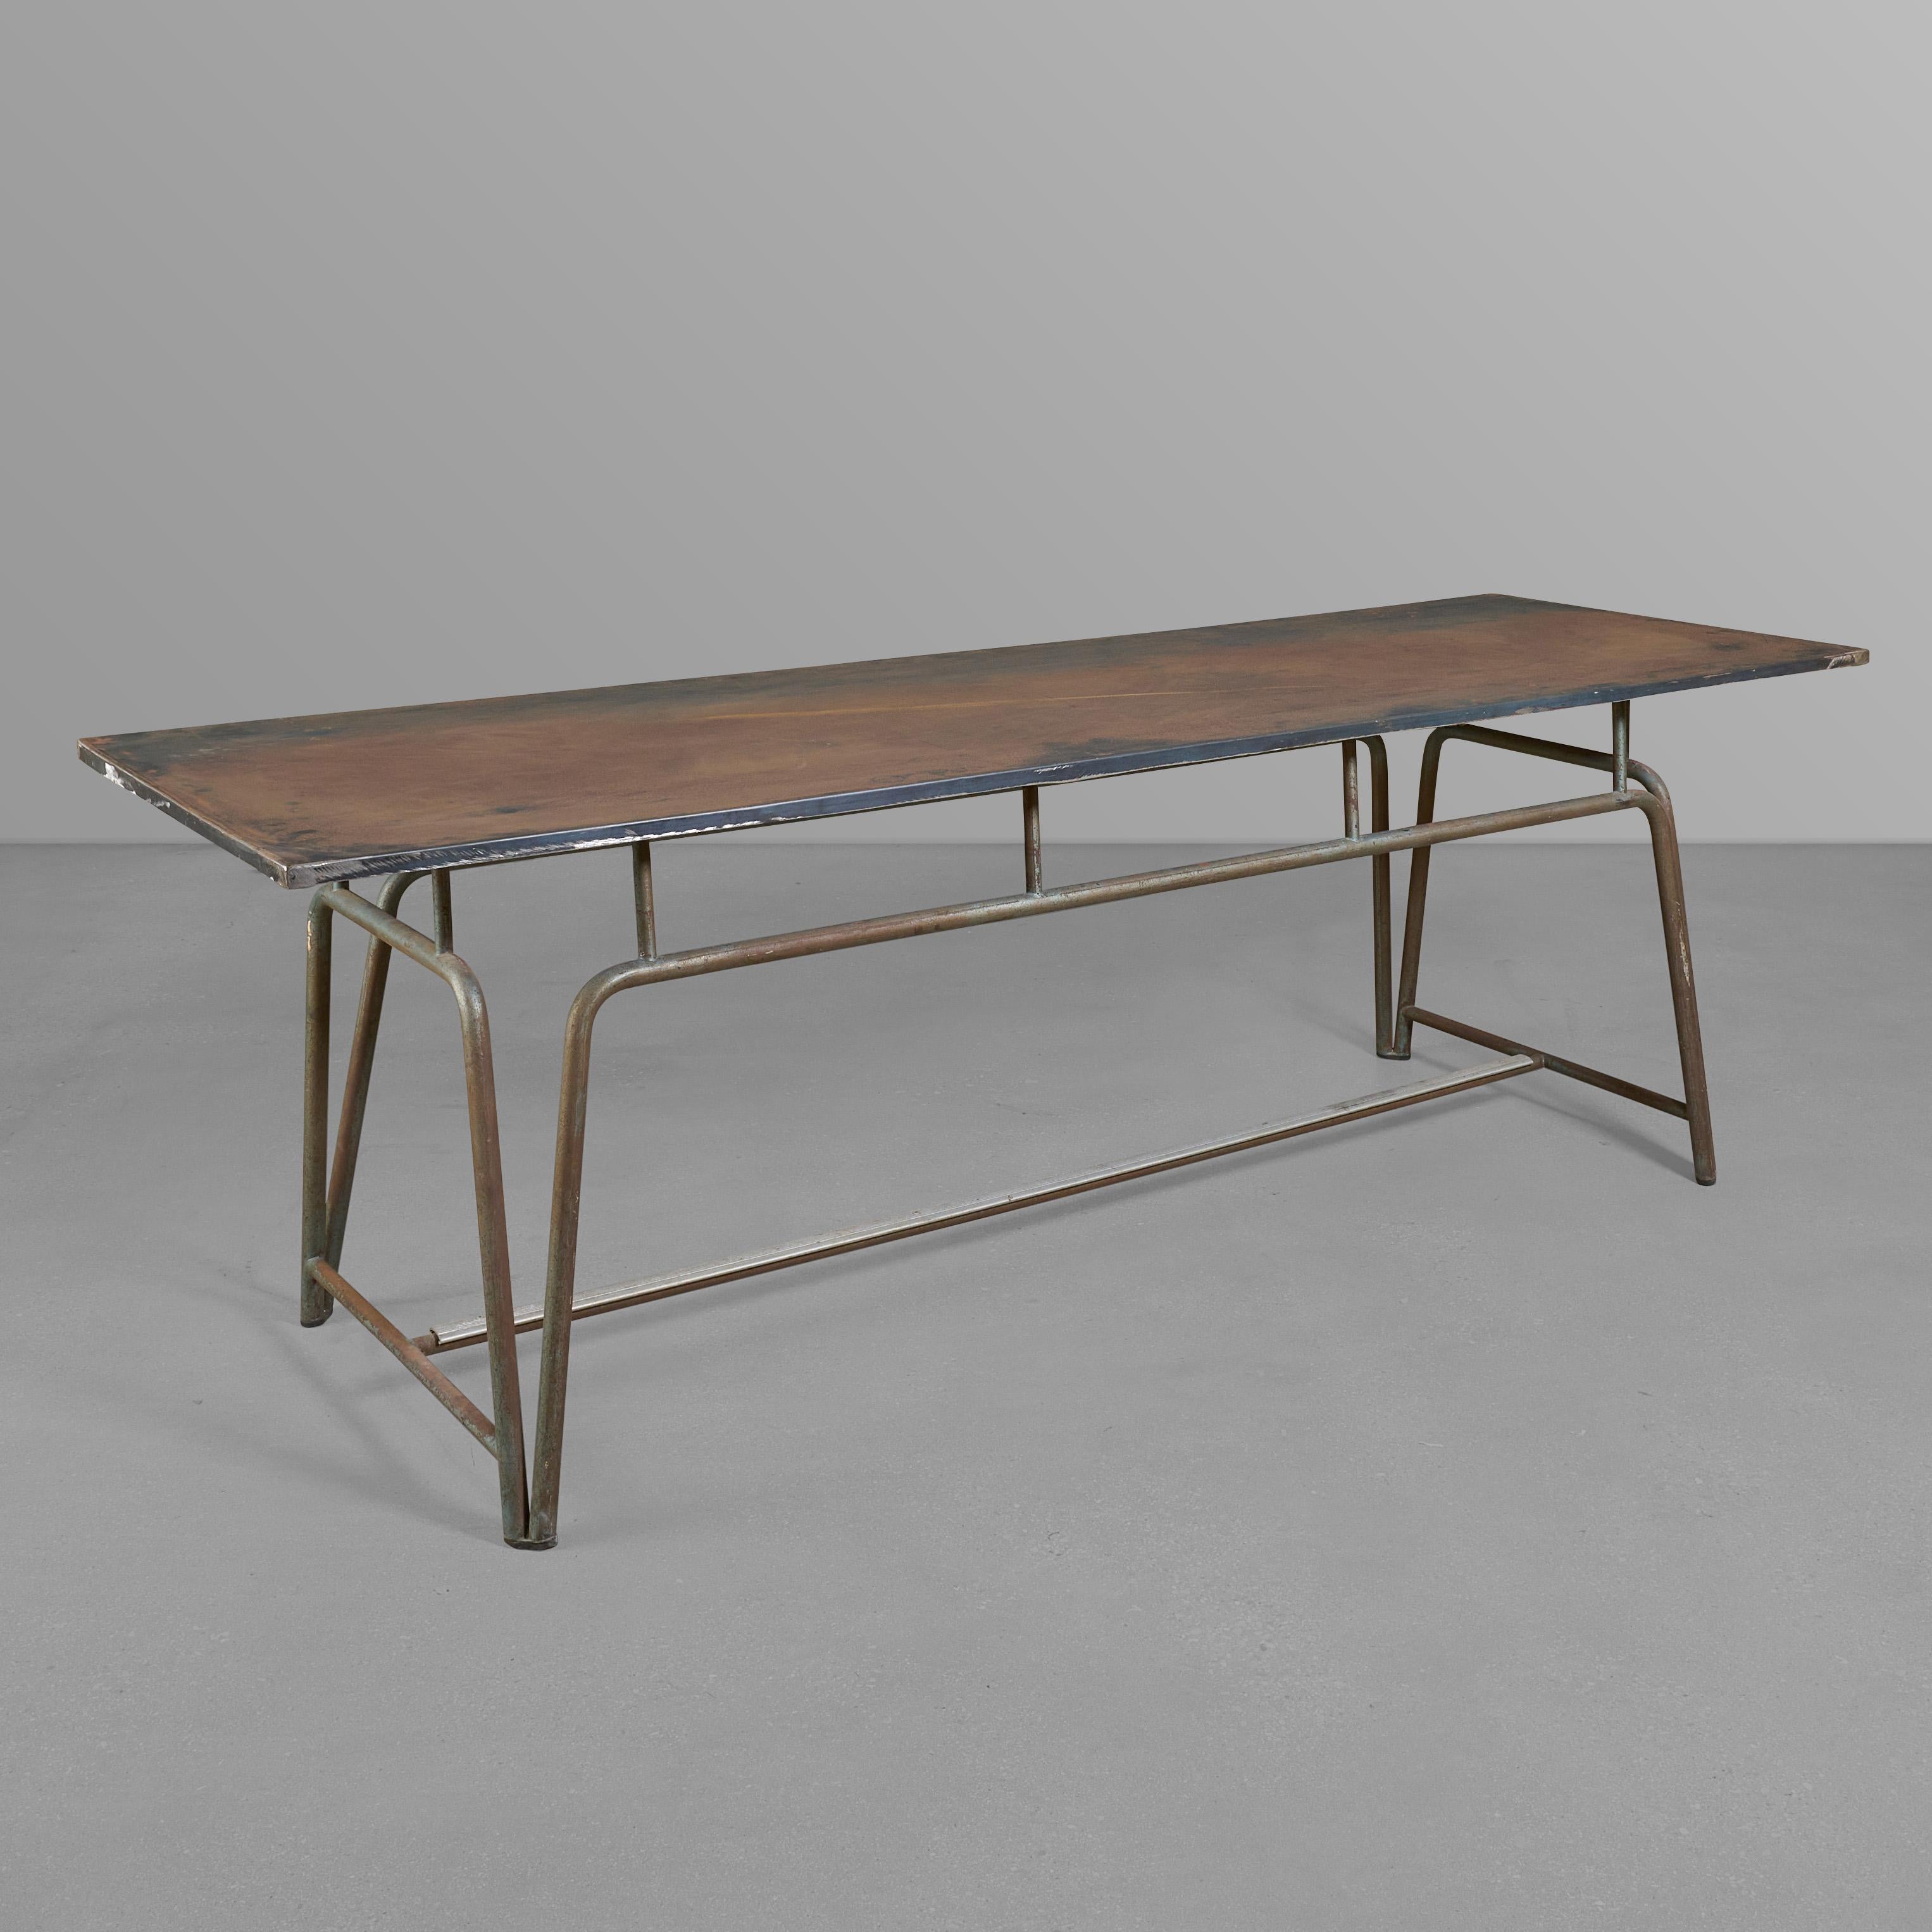 Mid-century metal table with a great base.

